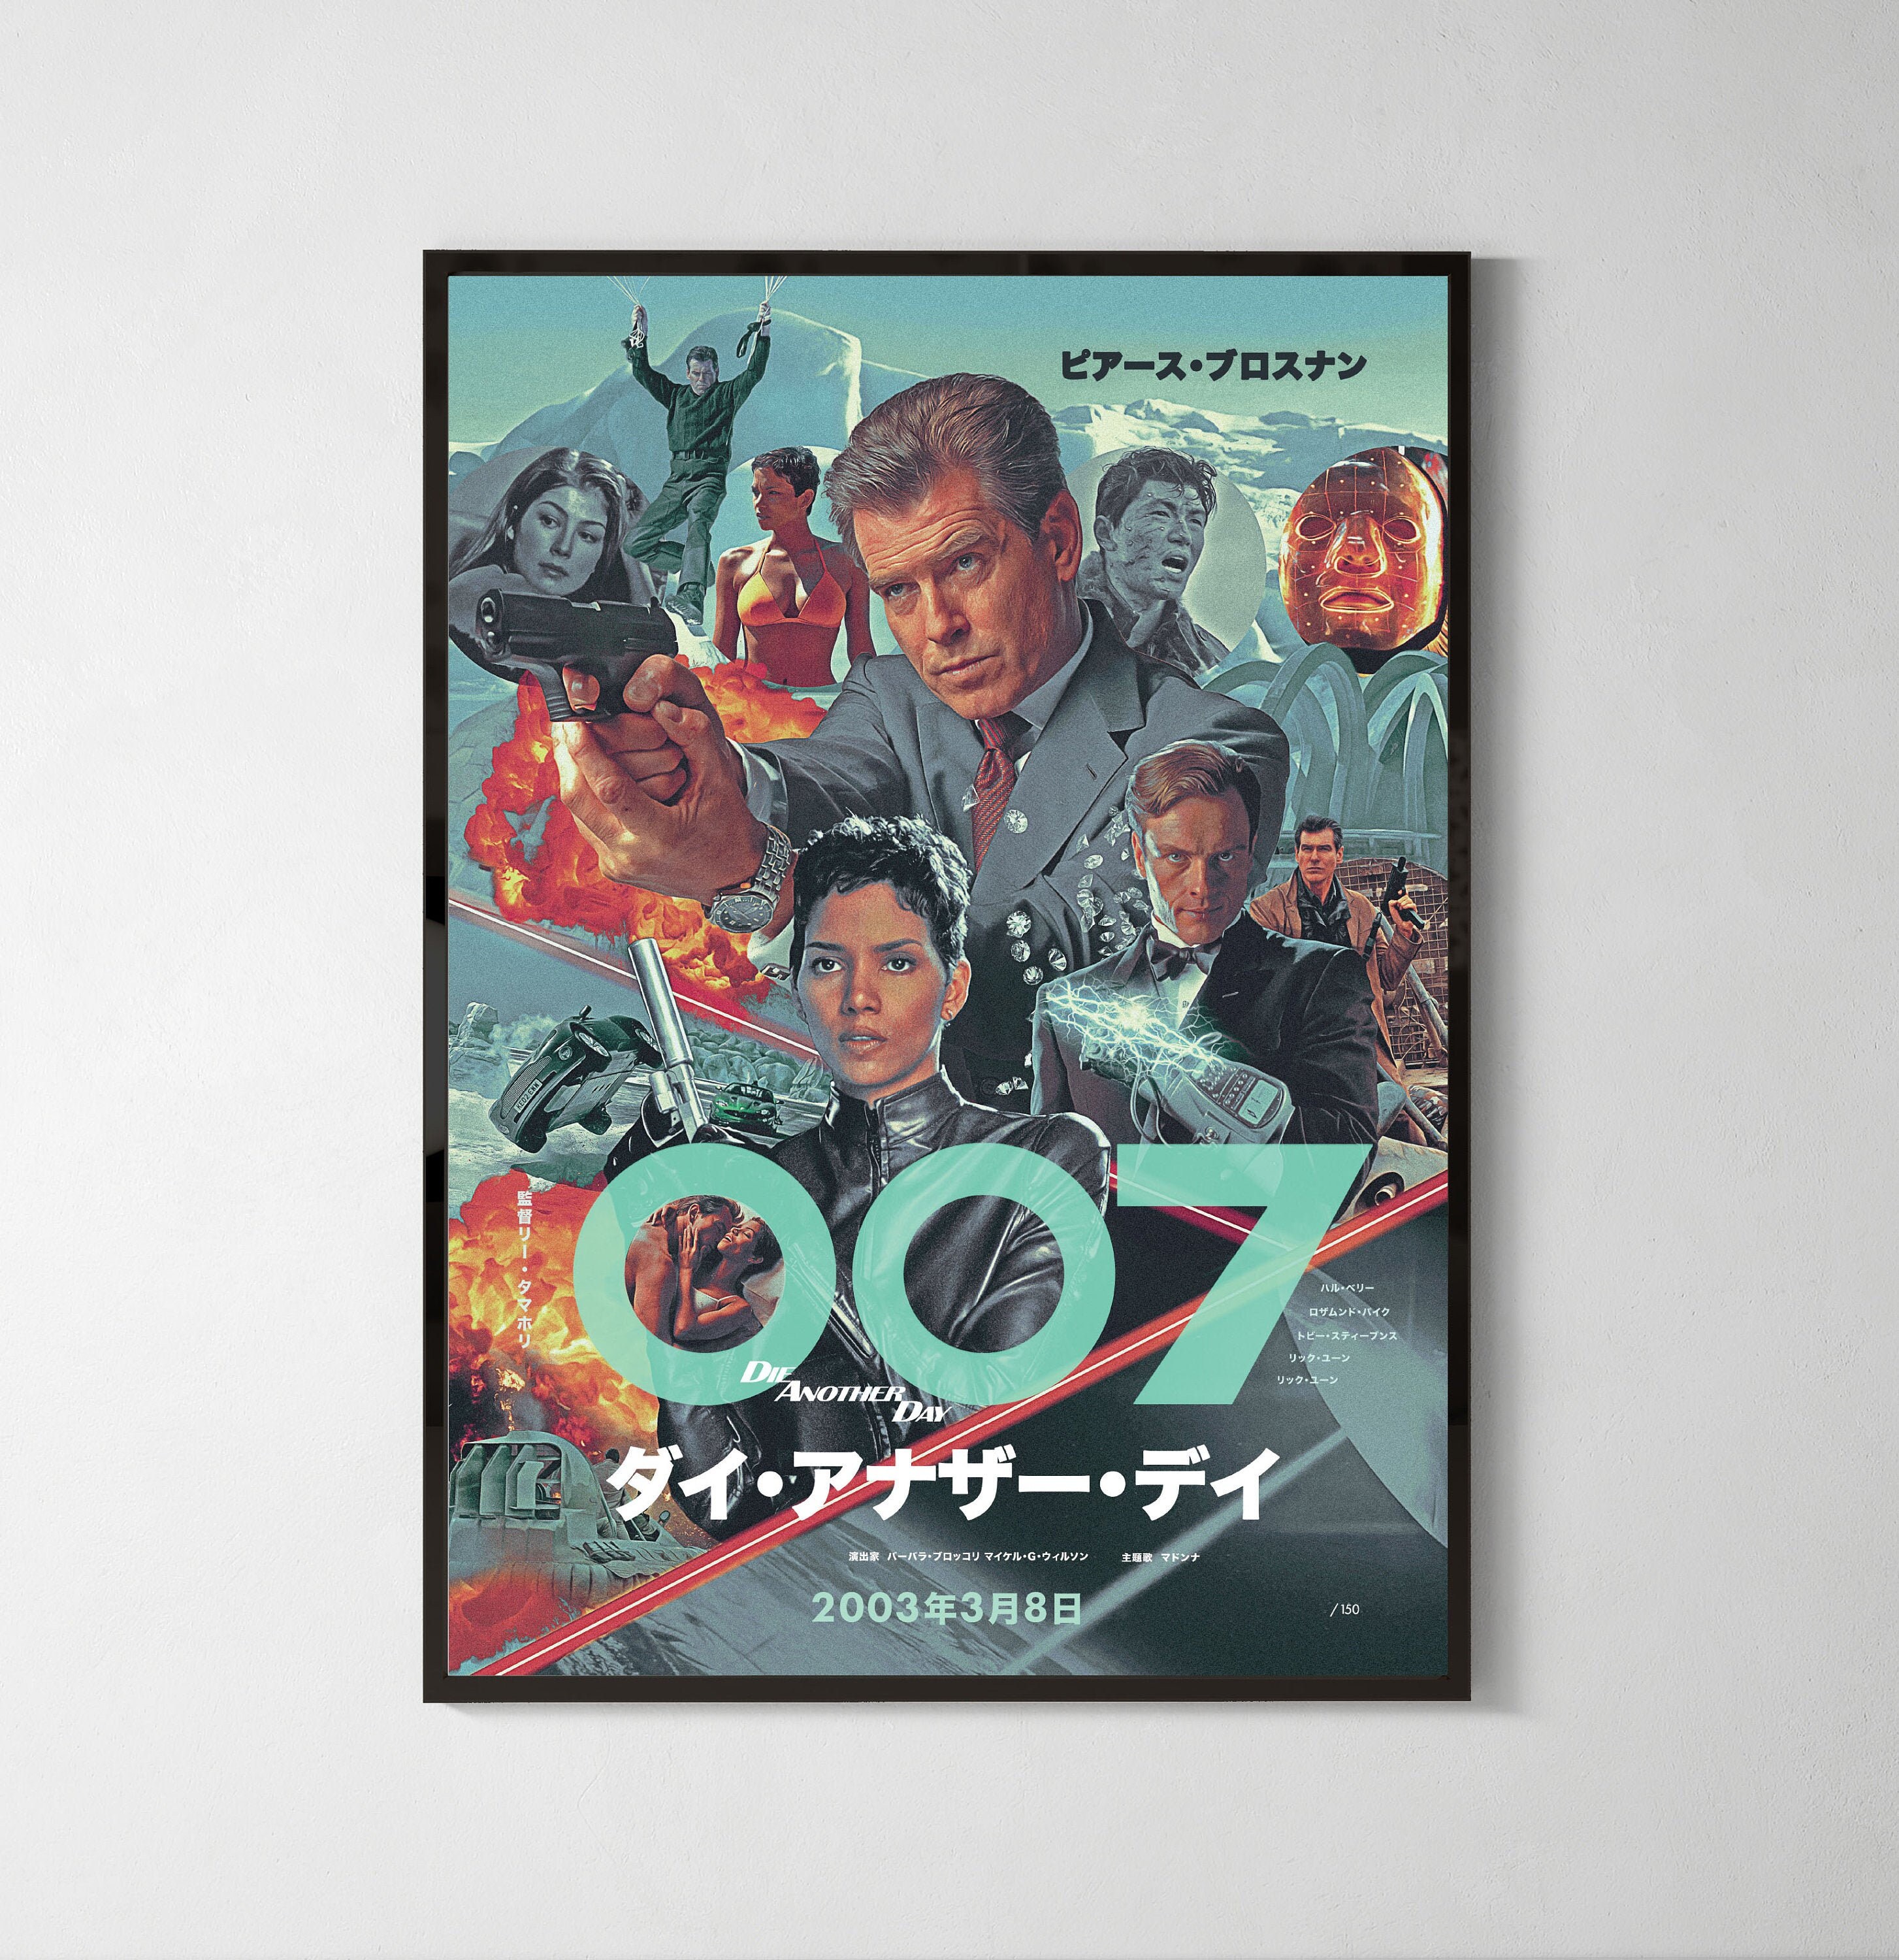 Inspired　007　Day　Retro　Die　ダイアナザーデイ　Etsy　Another　Japanese　UK